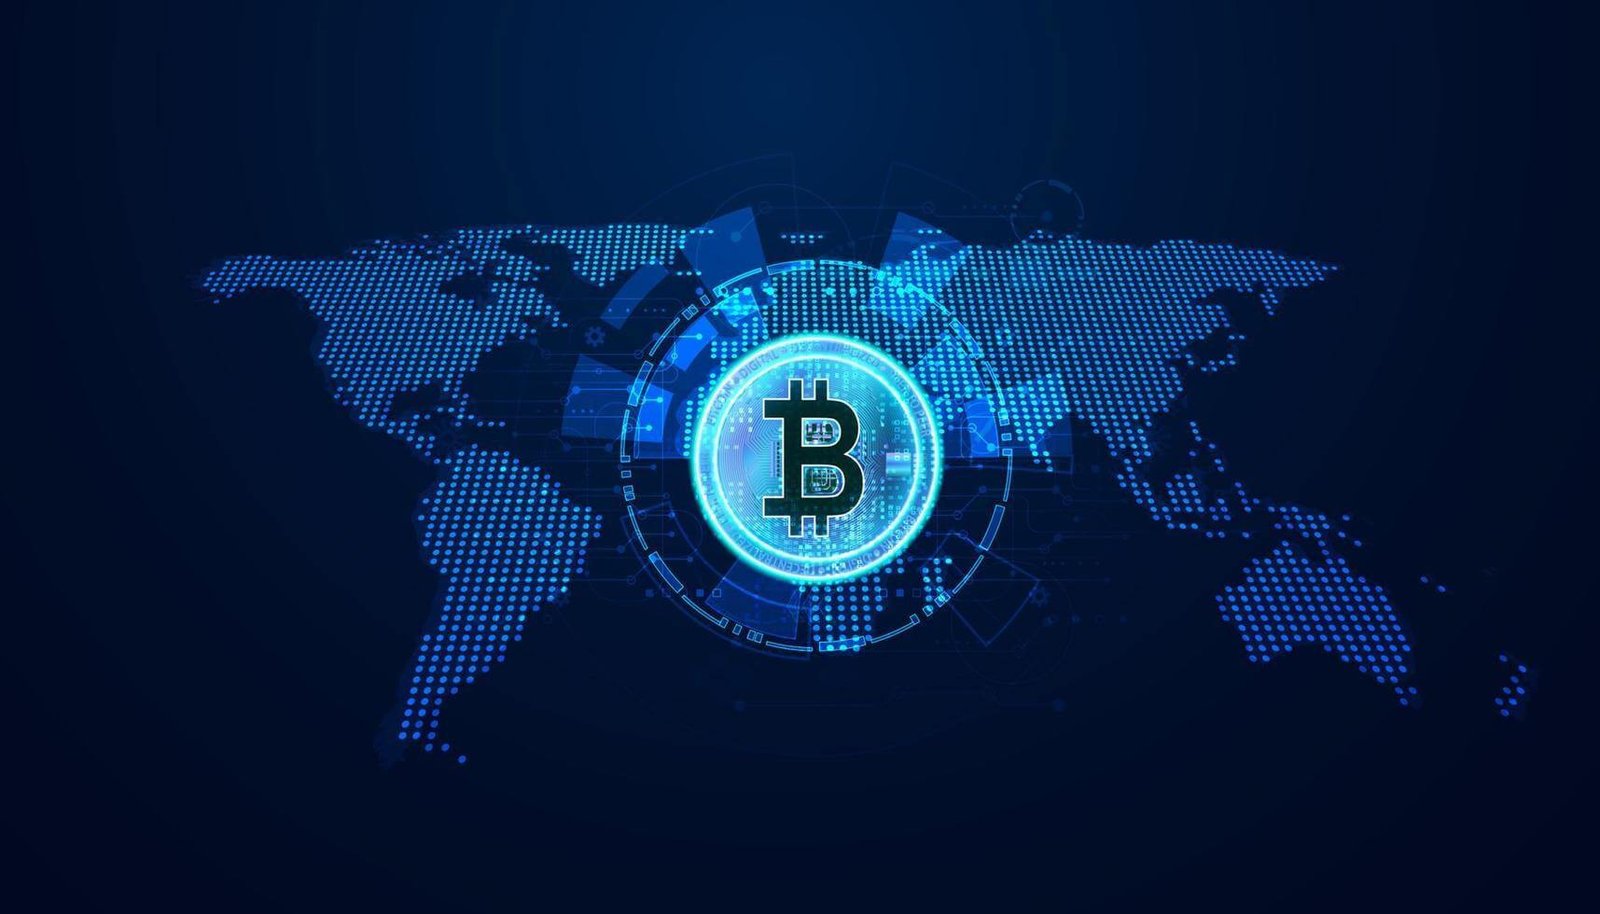 abstract-bitcoin-digital-futuristic-modern-background-concept-digital-map-background-dot-blue-currency-cryptocurrency-defi-cashless-finance-no-intermediaries-vector (1) techturning.com